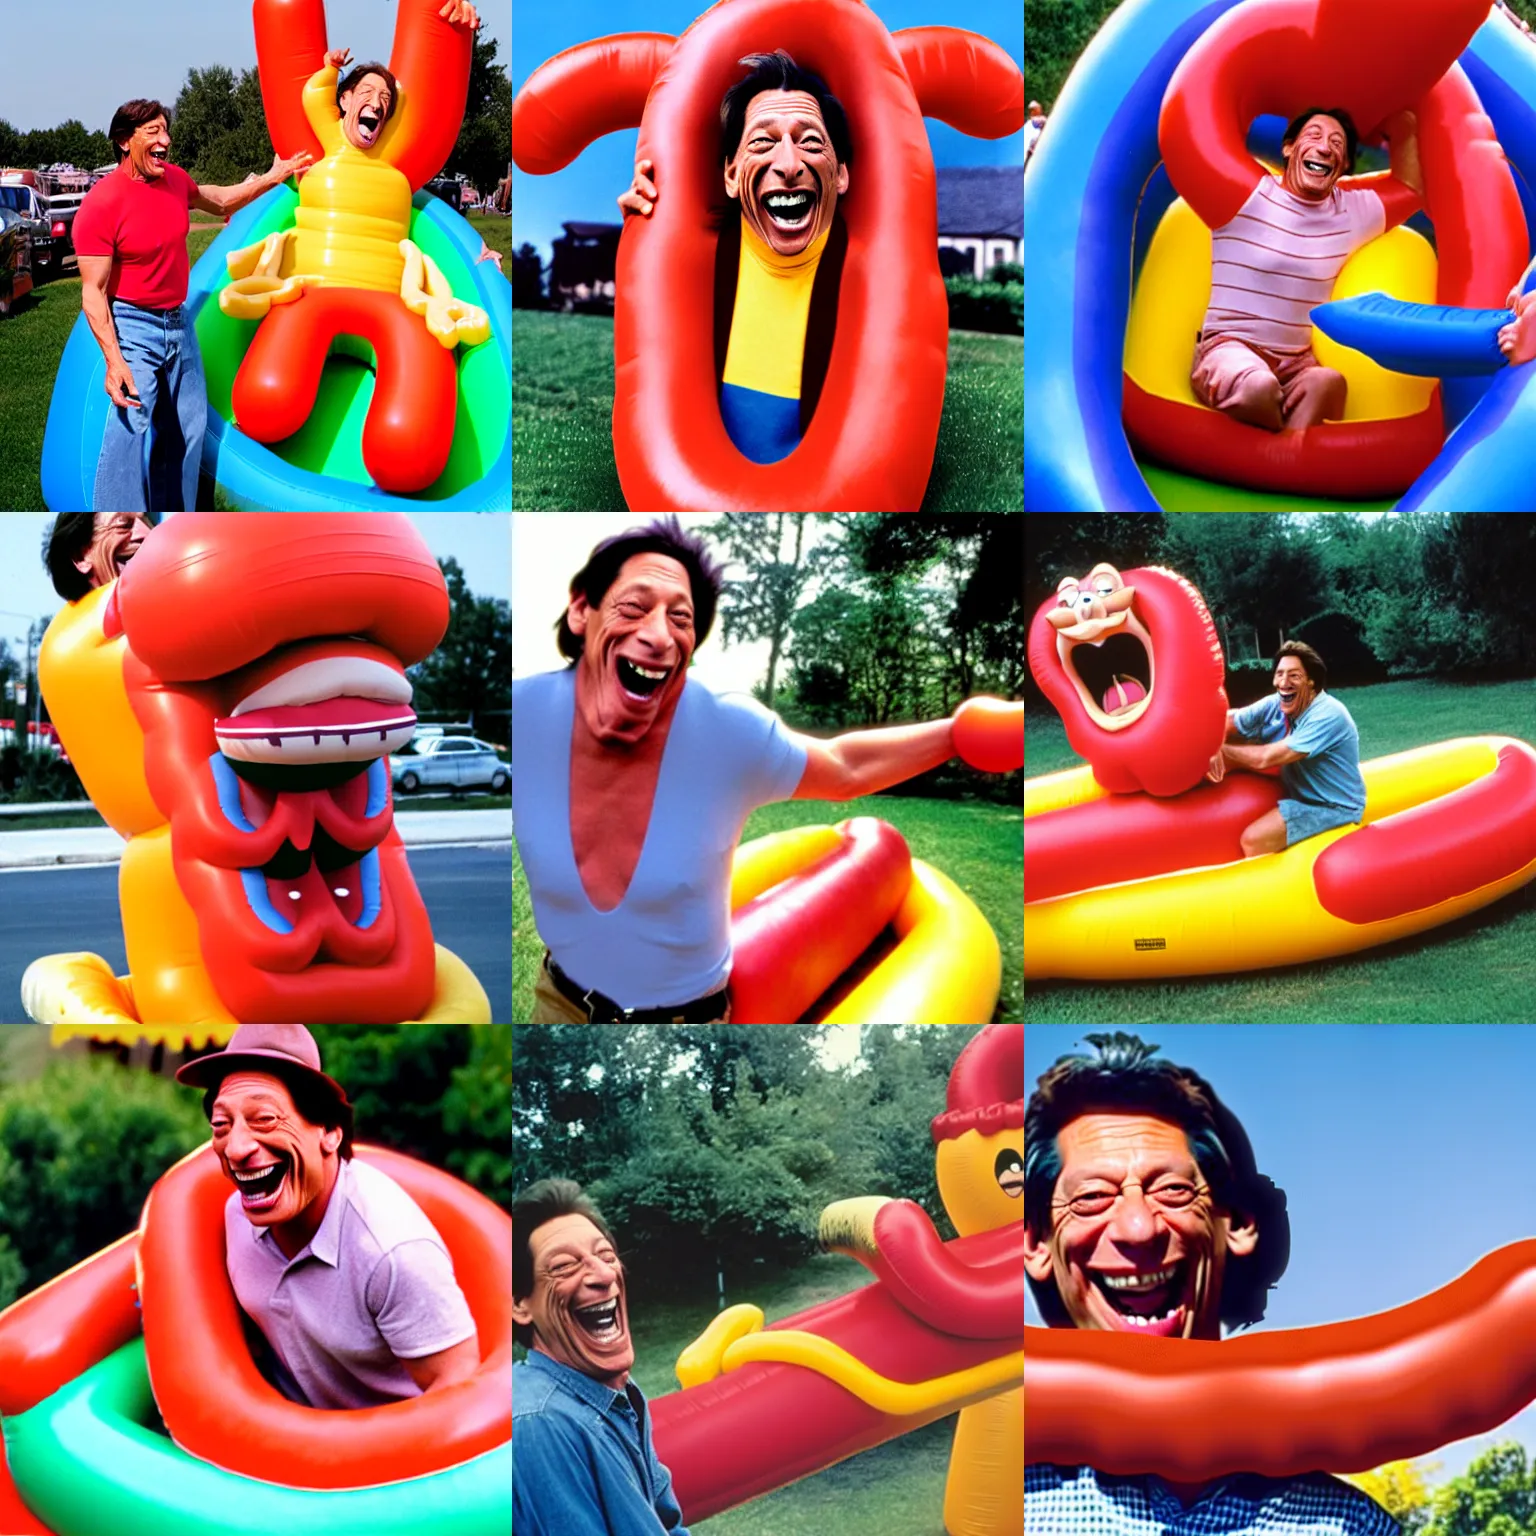 Prompt: jim varney laughing while he rides a large, inflatable hotdog.